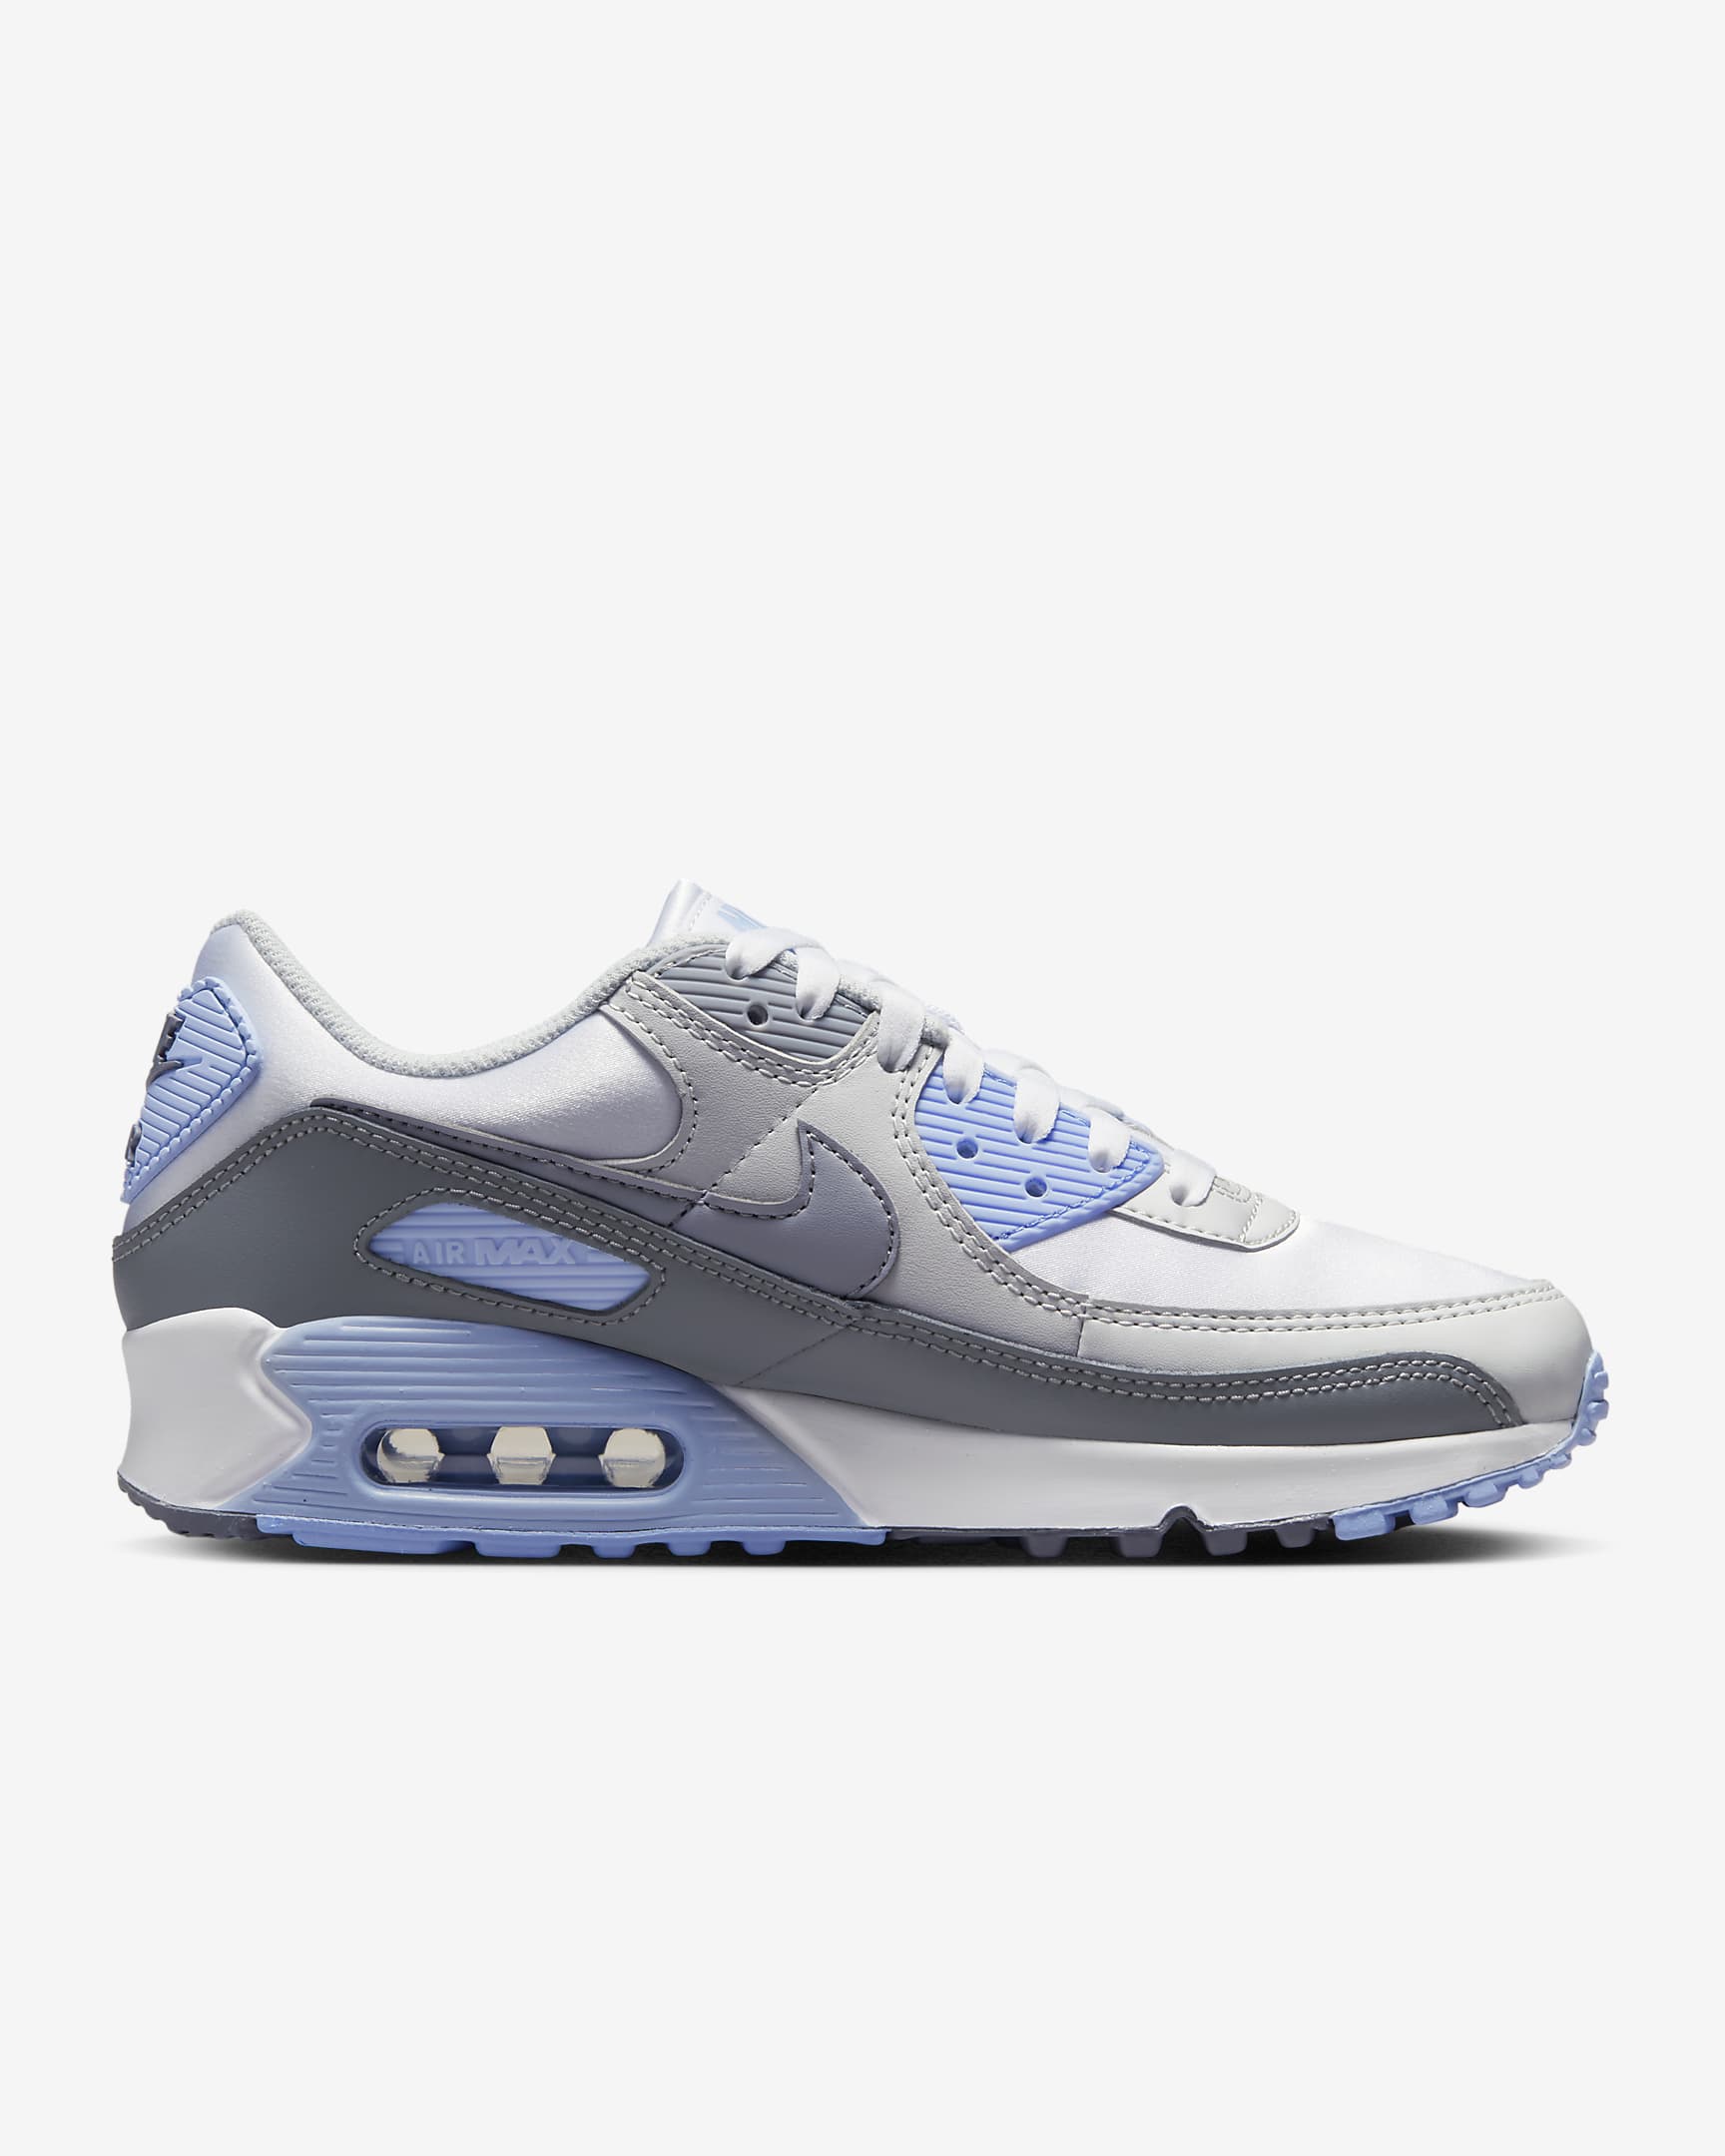 Nike Air Max 90 Women's Trainers Sneakers Fashion Shoes